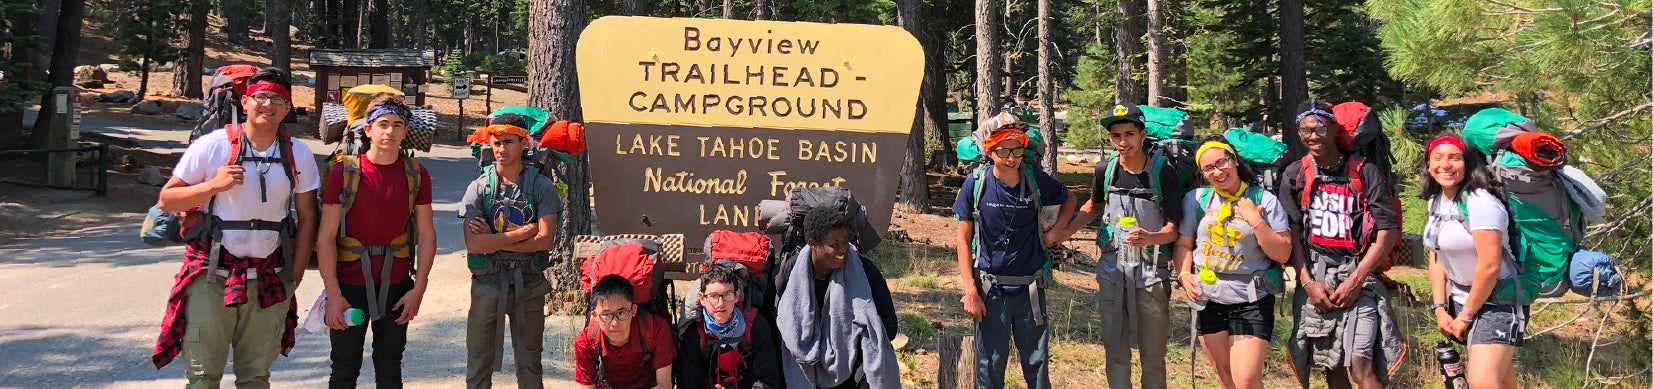 YMCA kids posed for a group picture in front of Bayview Campground trailhead sign